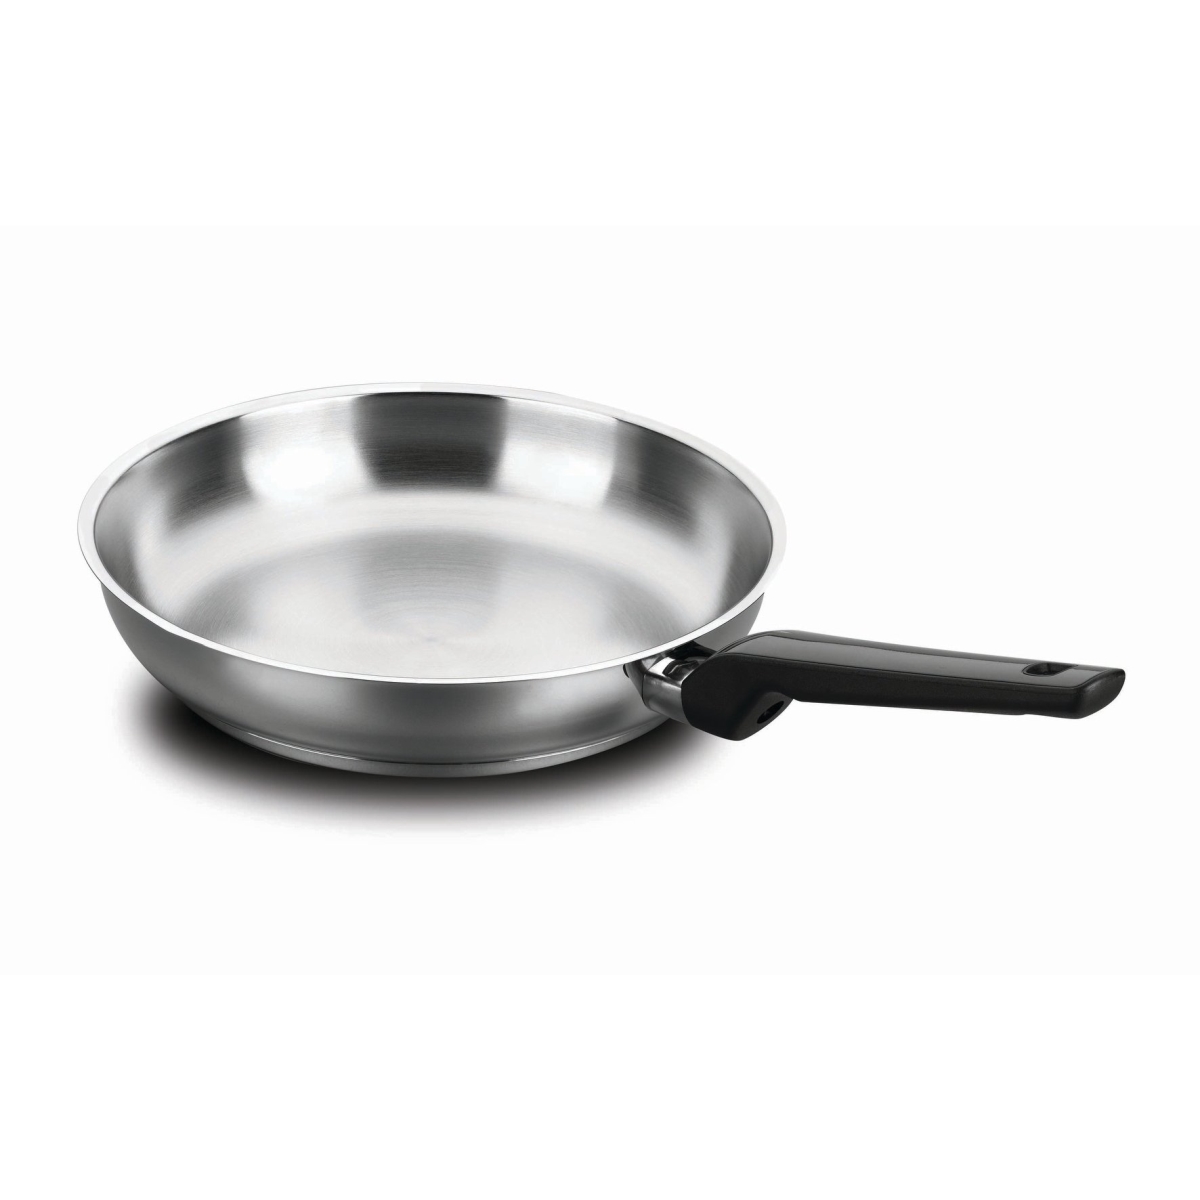 Korkmaz A1698 9 In. Classic 18 By 10 Stainless Steel Deep Frying Stir Fry Pan